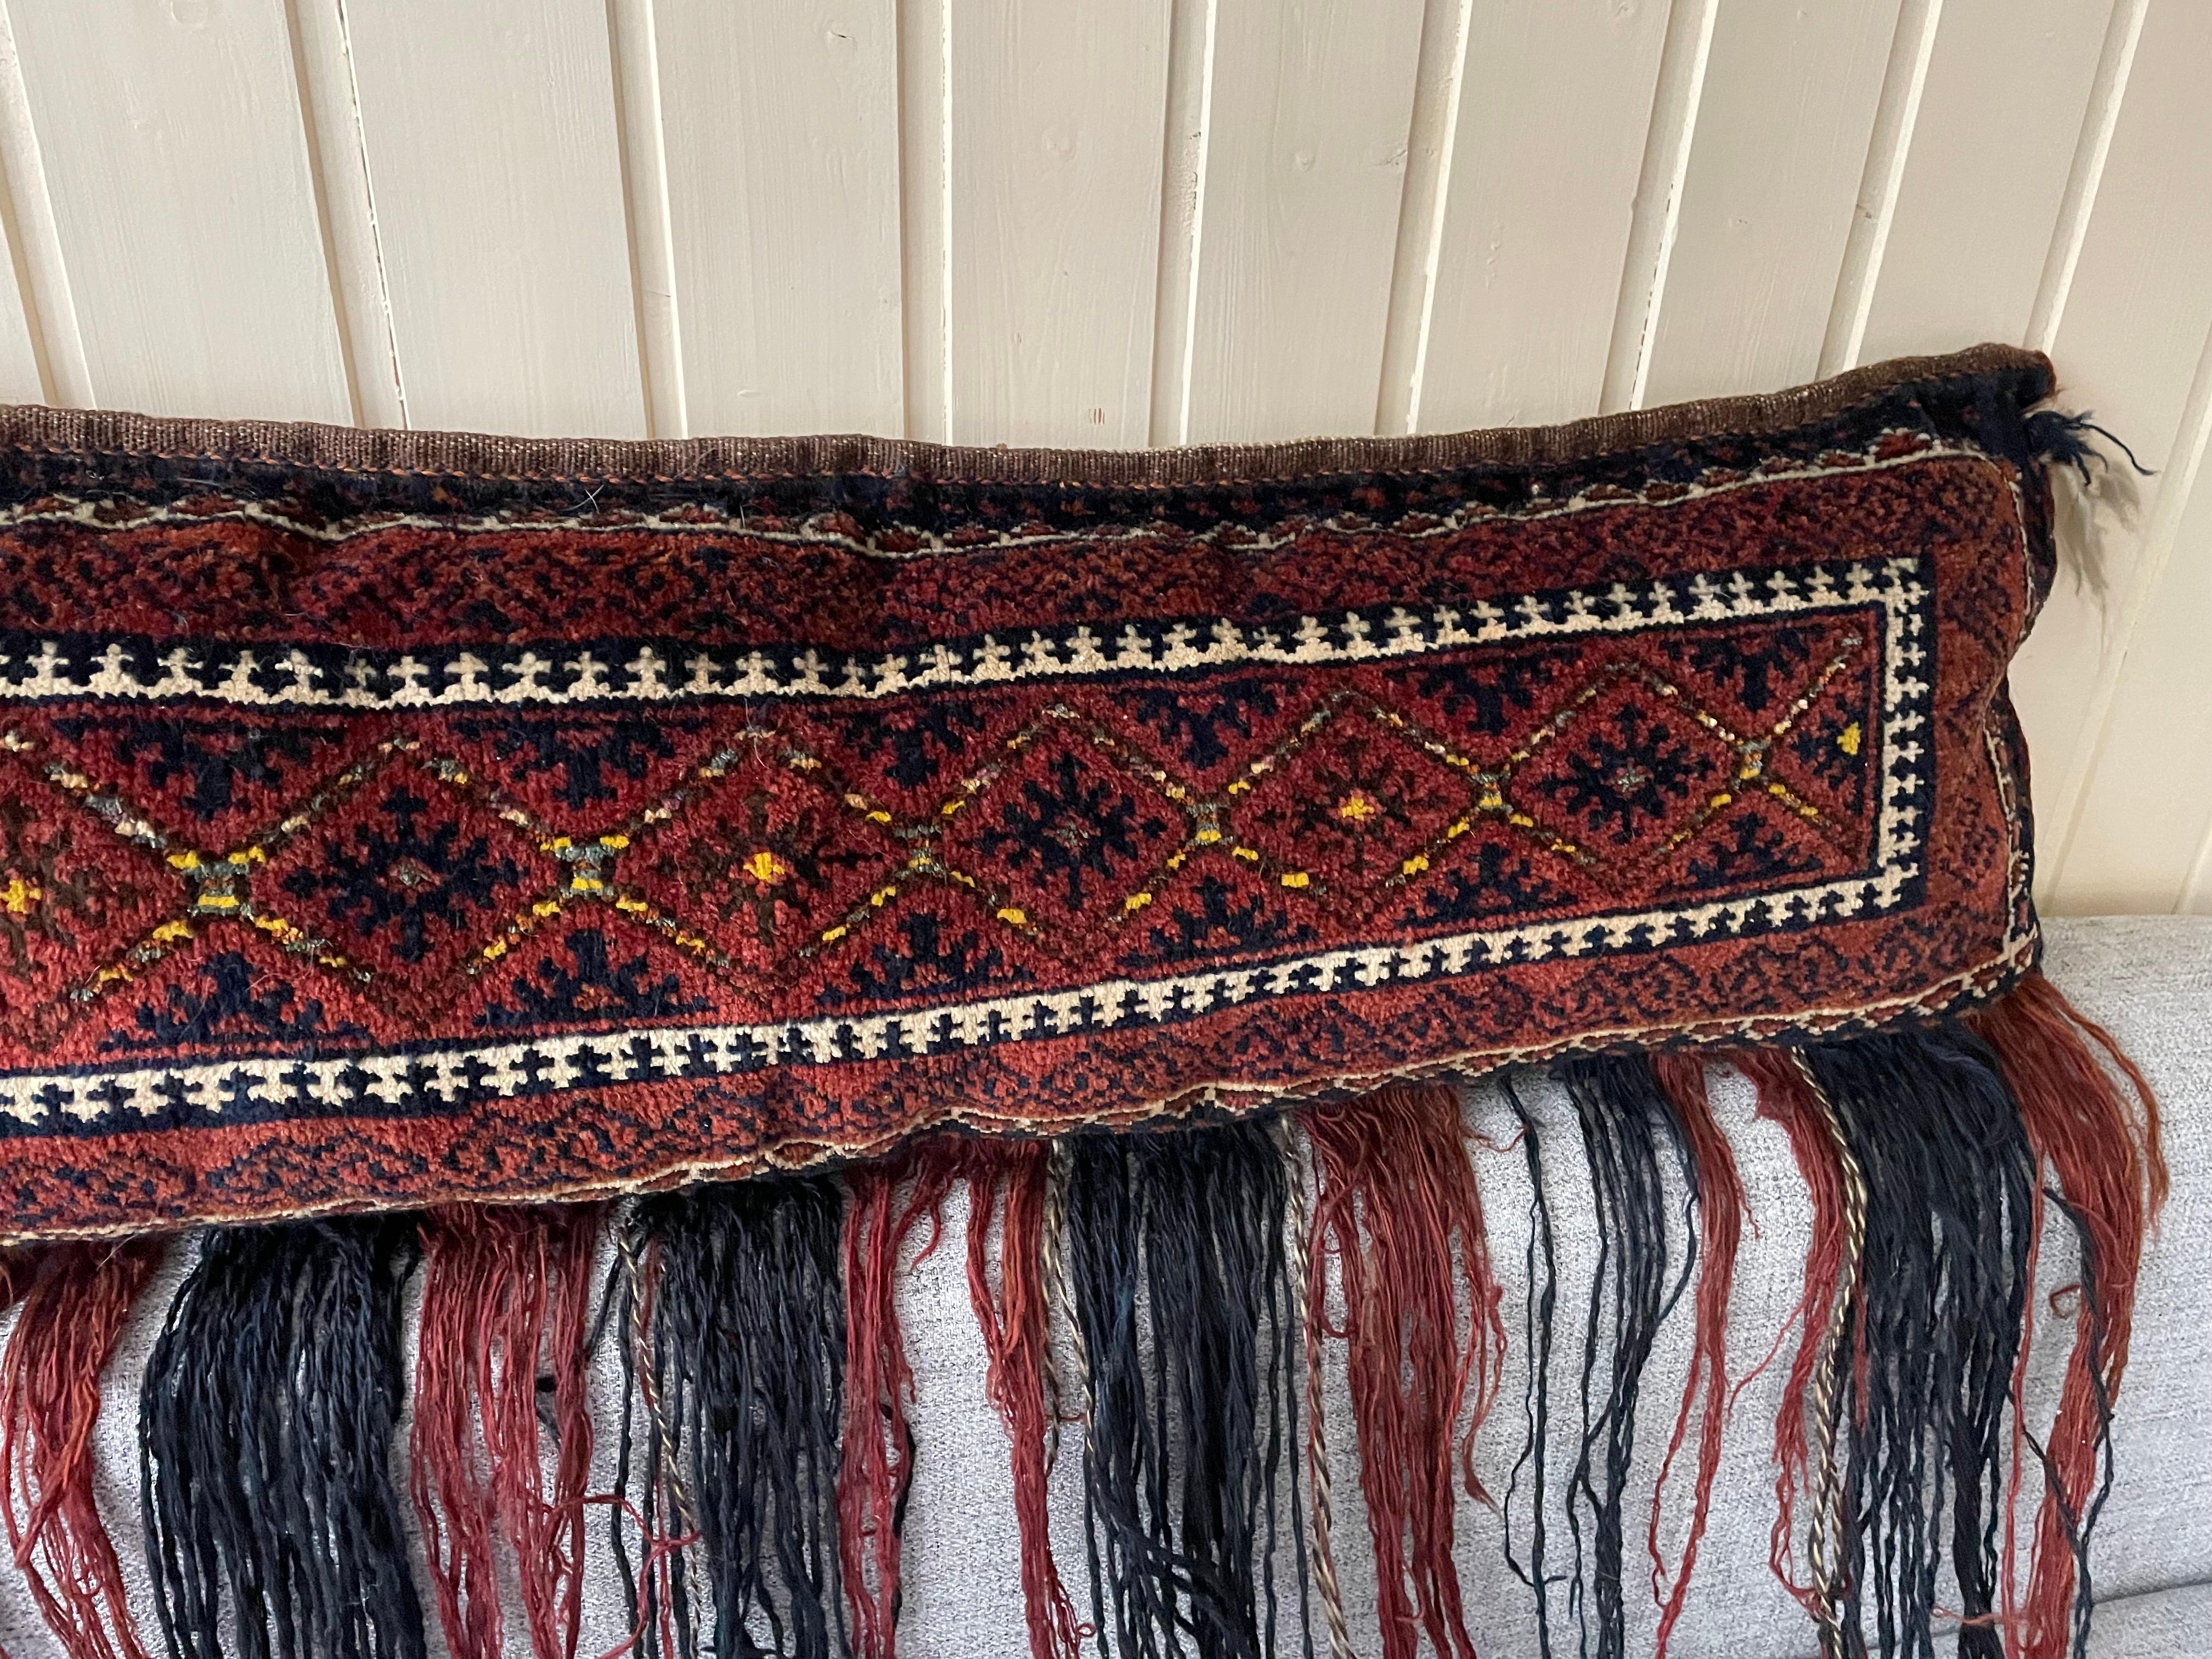 Hand-Knotted Large Gypsy Oriental Salt Bag or Rug Embroidery Pillow For Sale